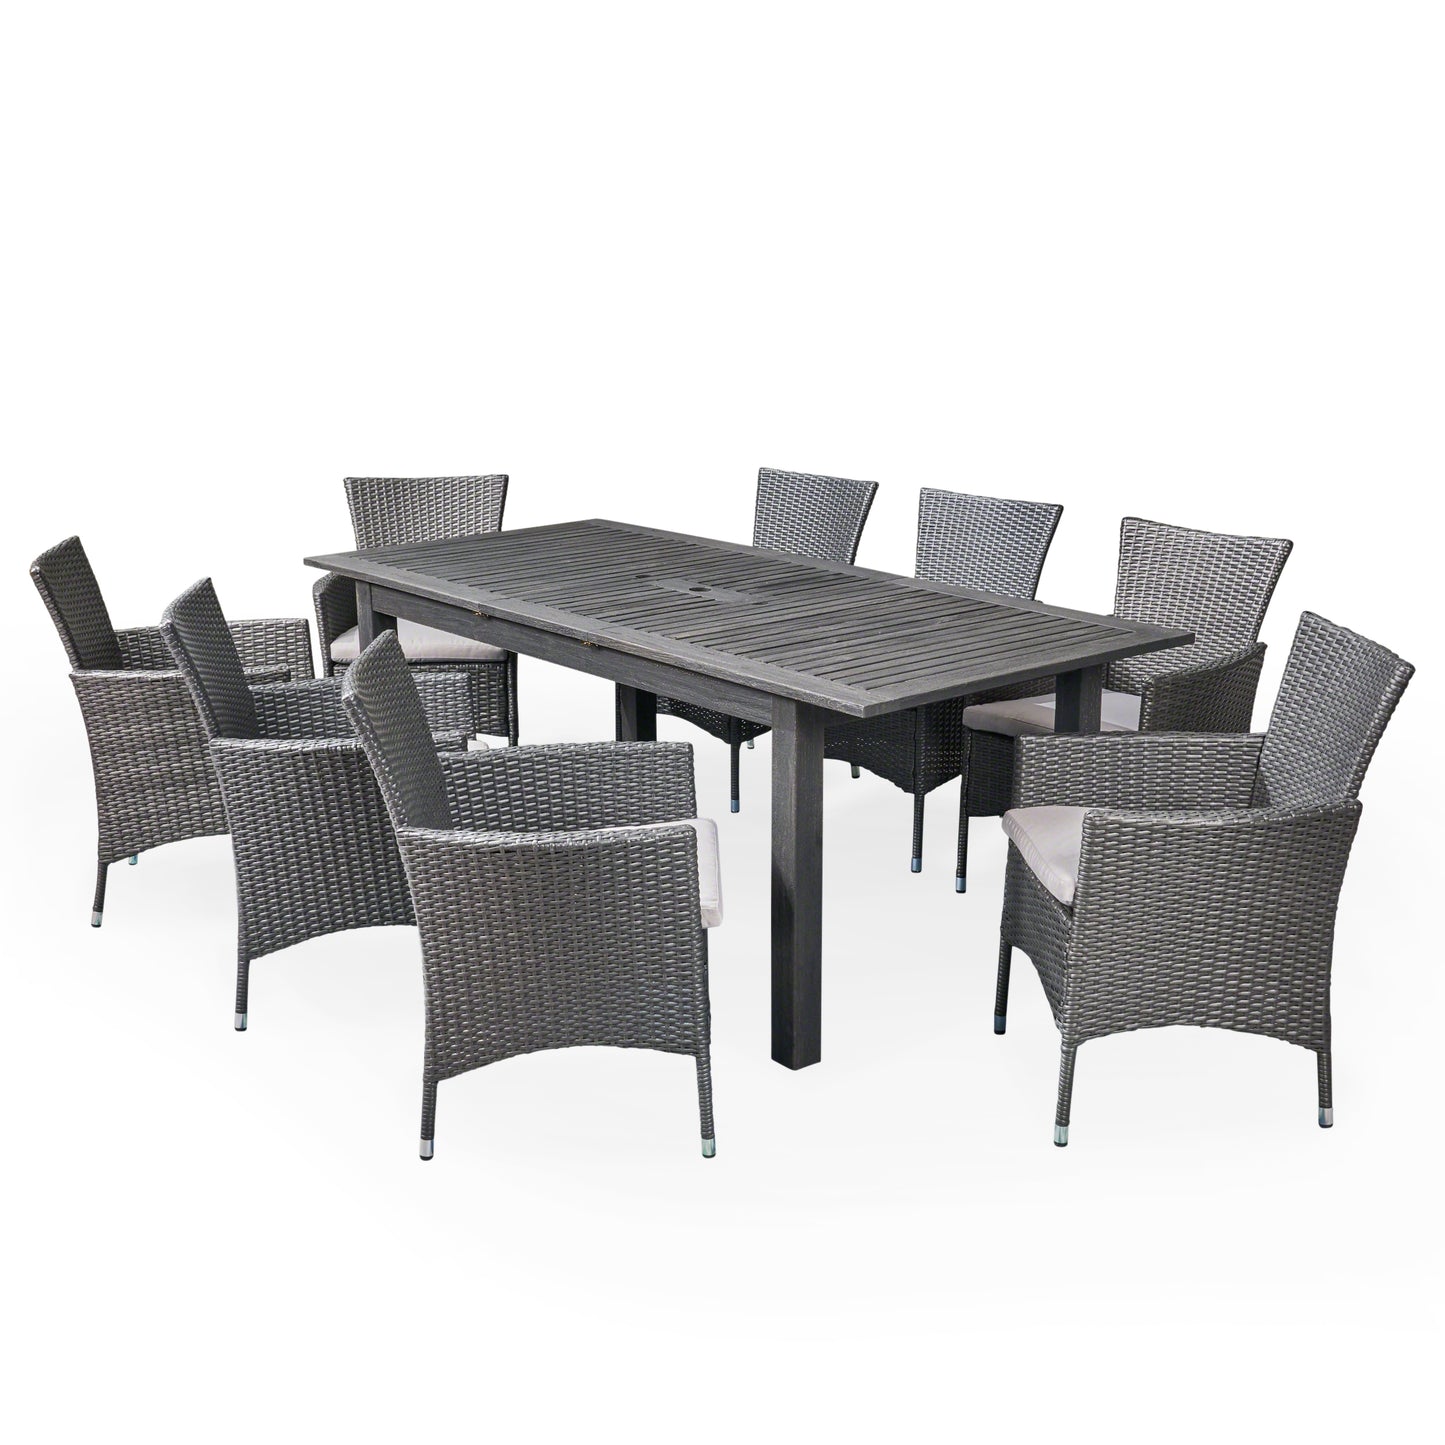 Saluda Outdoor Wood and Wicker Expandable Dining Set